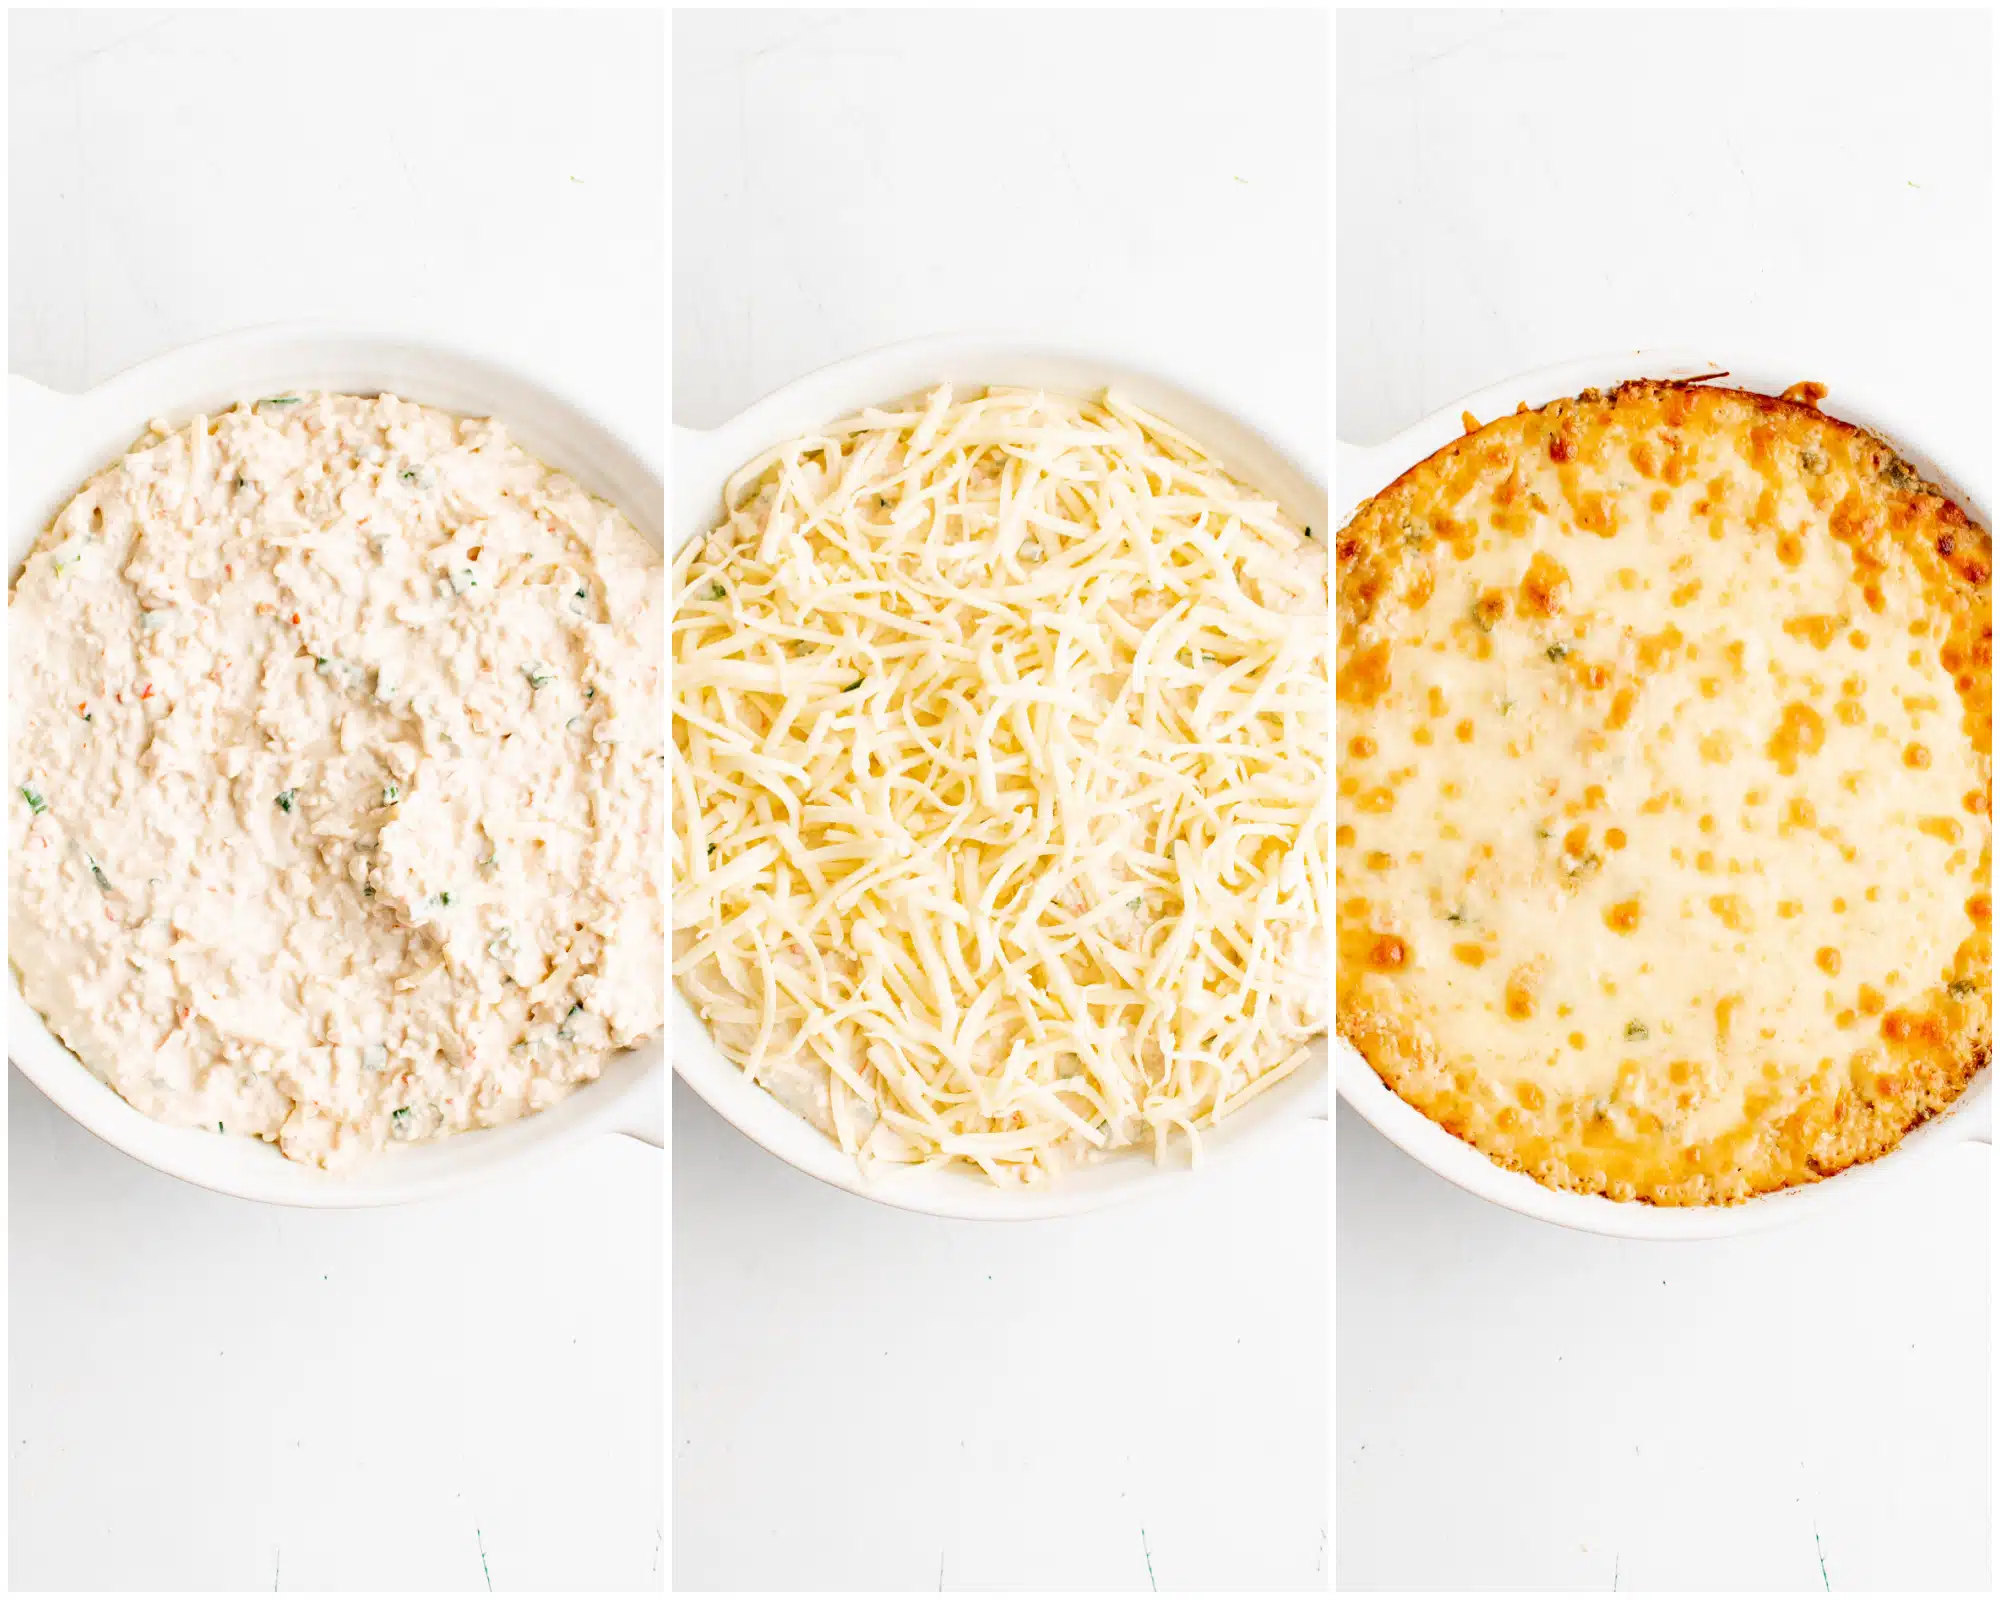 Three images in a collage showing steps in making crab rangoon dip: The first image shows prepared crab dip mixture in a round baking dish; the second image shows the crab mixture in a round baking dish topped with shredded Monterey Jack cheese; and the last image shows the hot and cheesy baked crab rangoon dip just out of the oven.